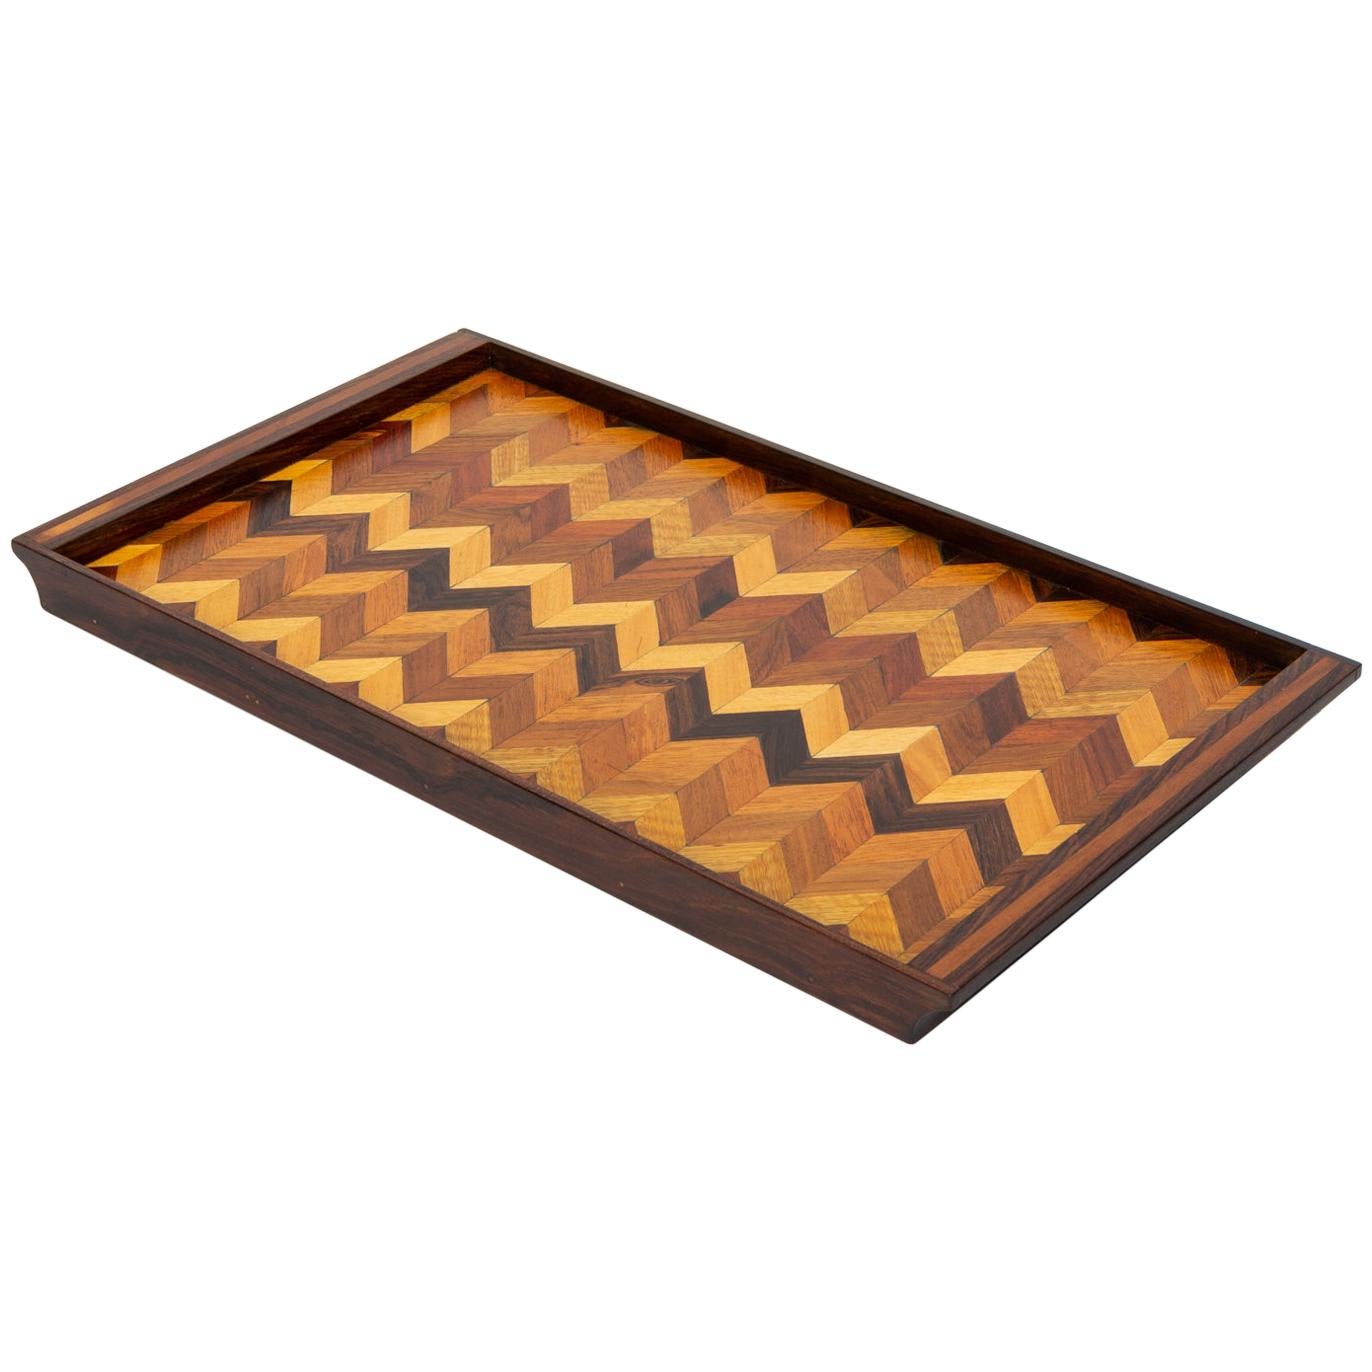 Inlaid Tray with Chevron Pattern by Don Shoemaker for Senal